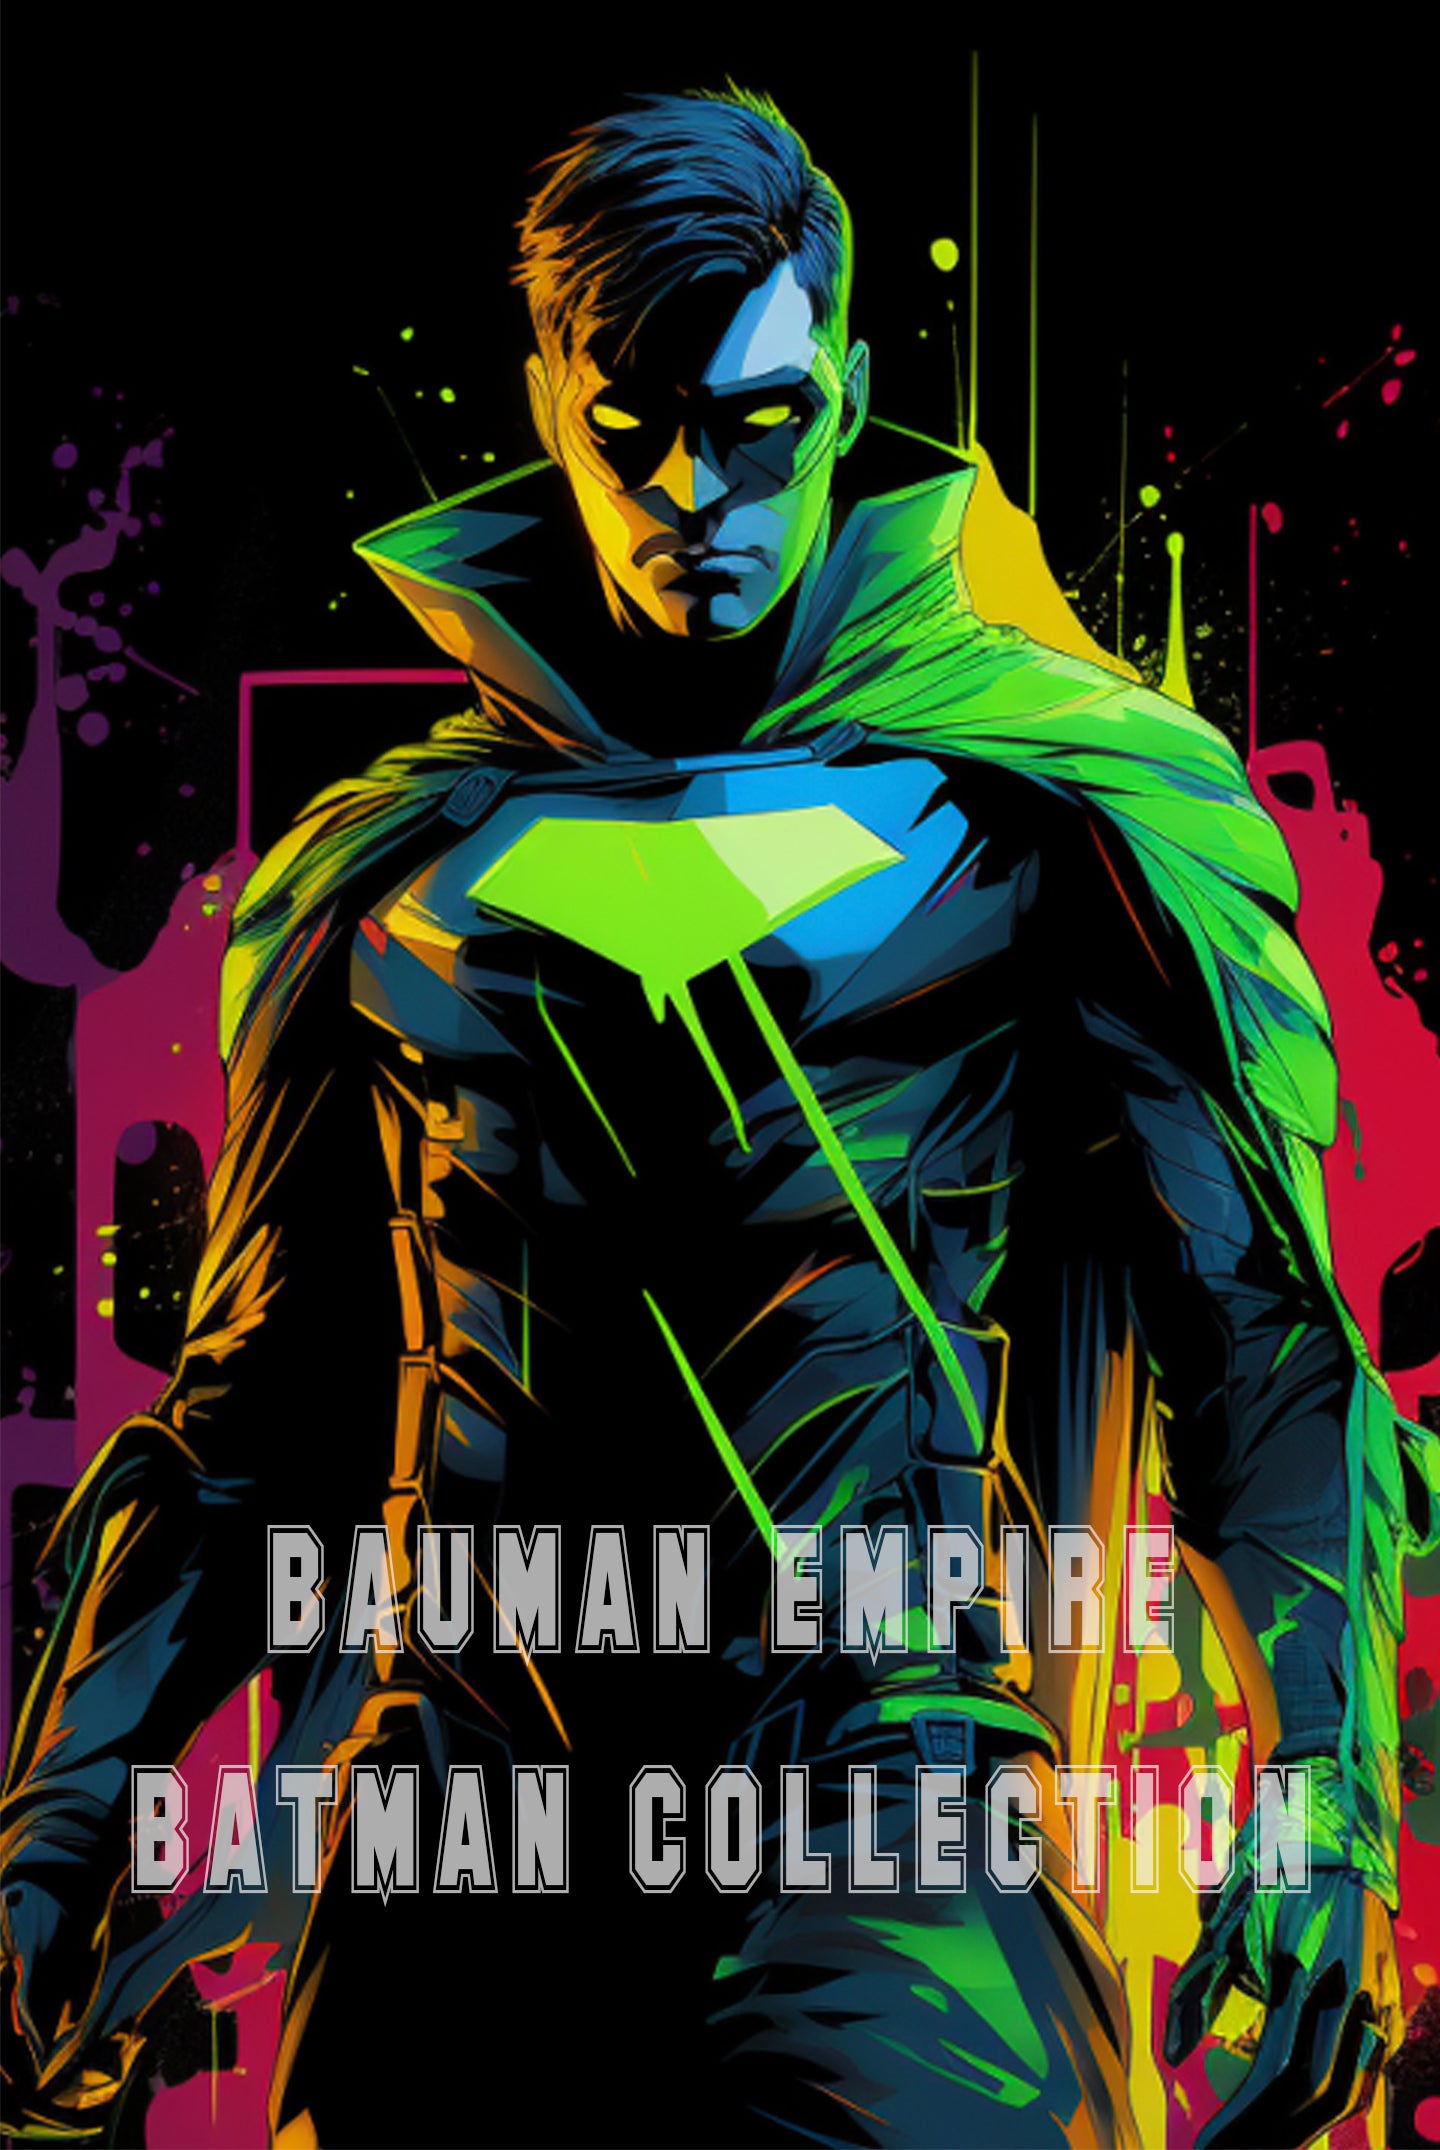 BAT MAN COLLECTION OF 9 POSTERS